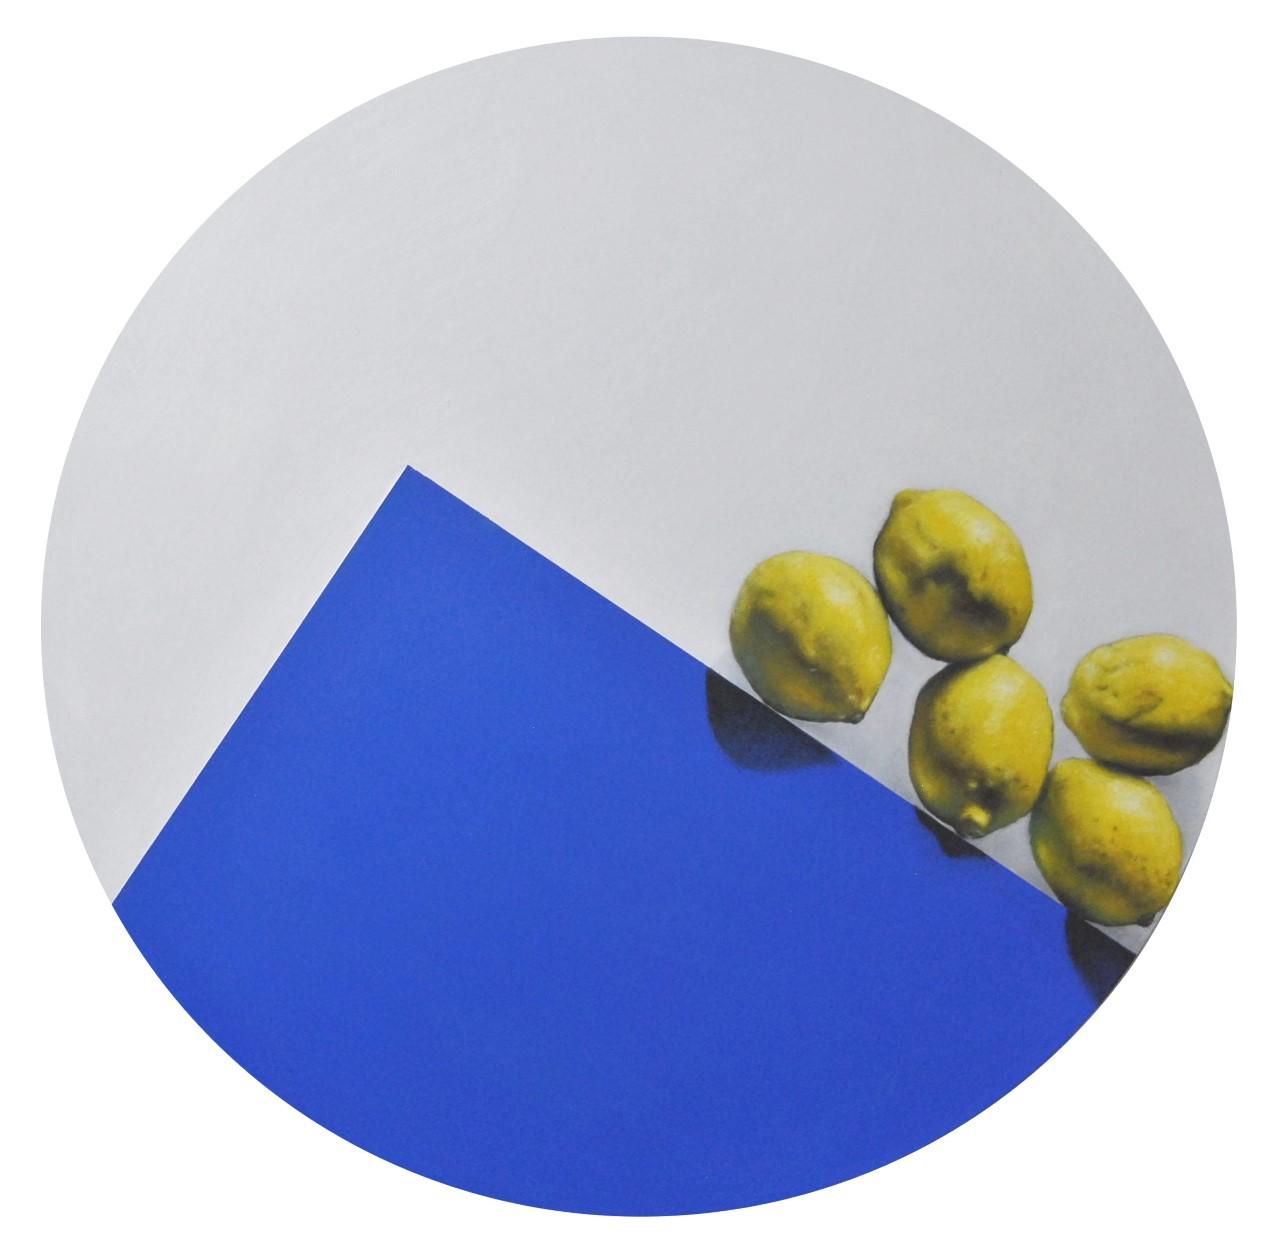 Nick Rooney painting, five yellow lemons seemingly rolling down a bright blue prism. 